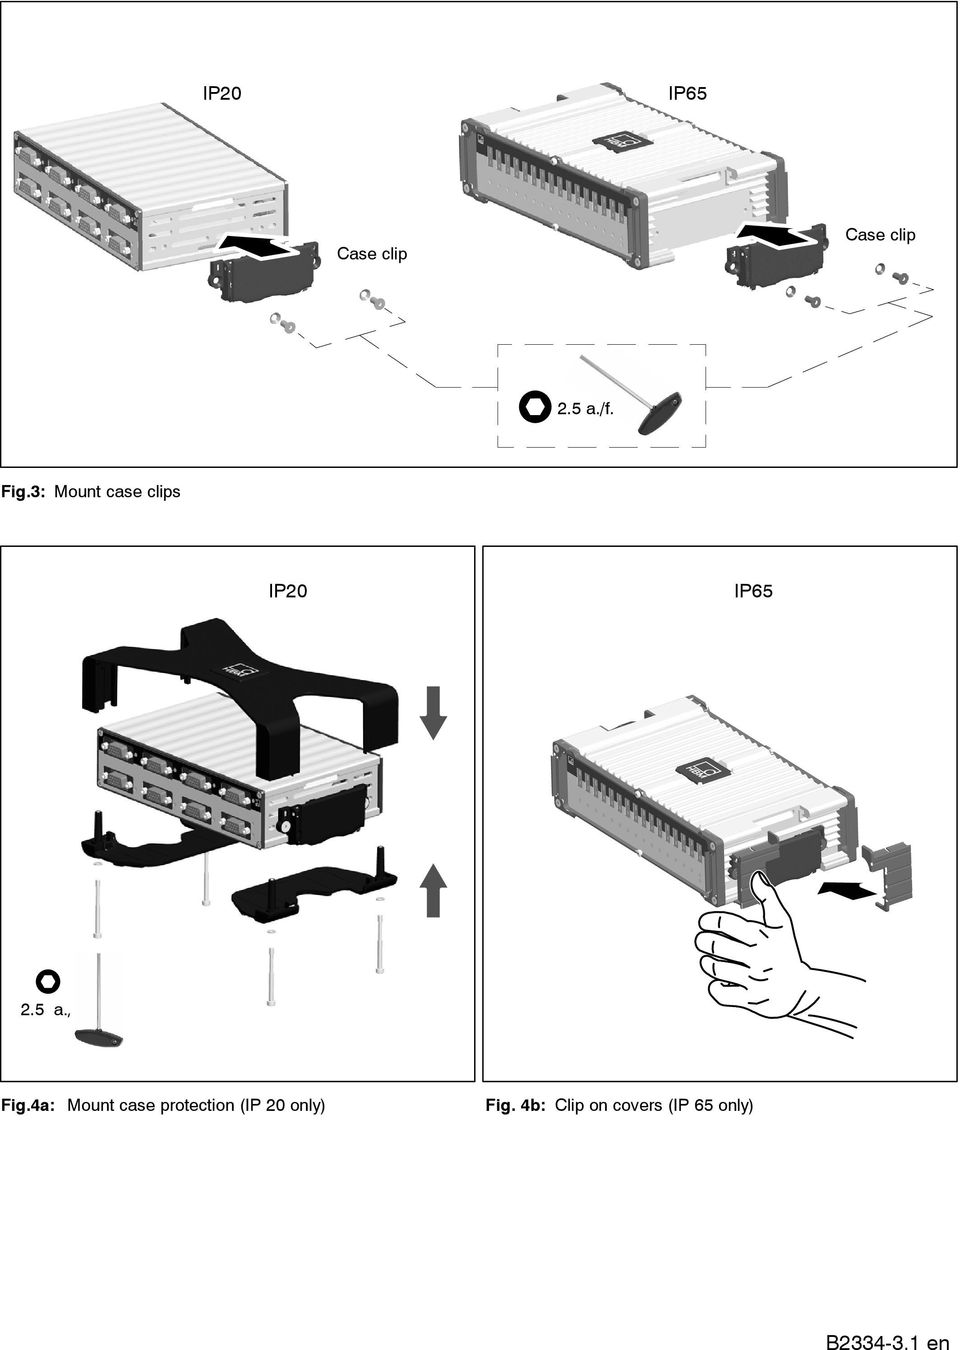 4a: Mount case protection (IP 20 only) Fig.